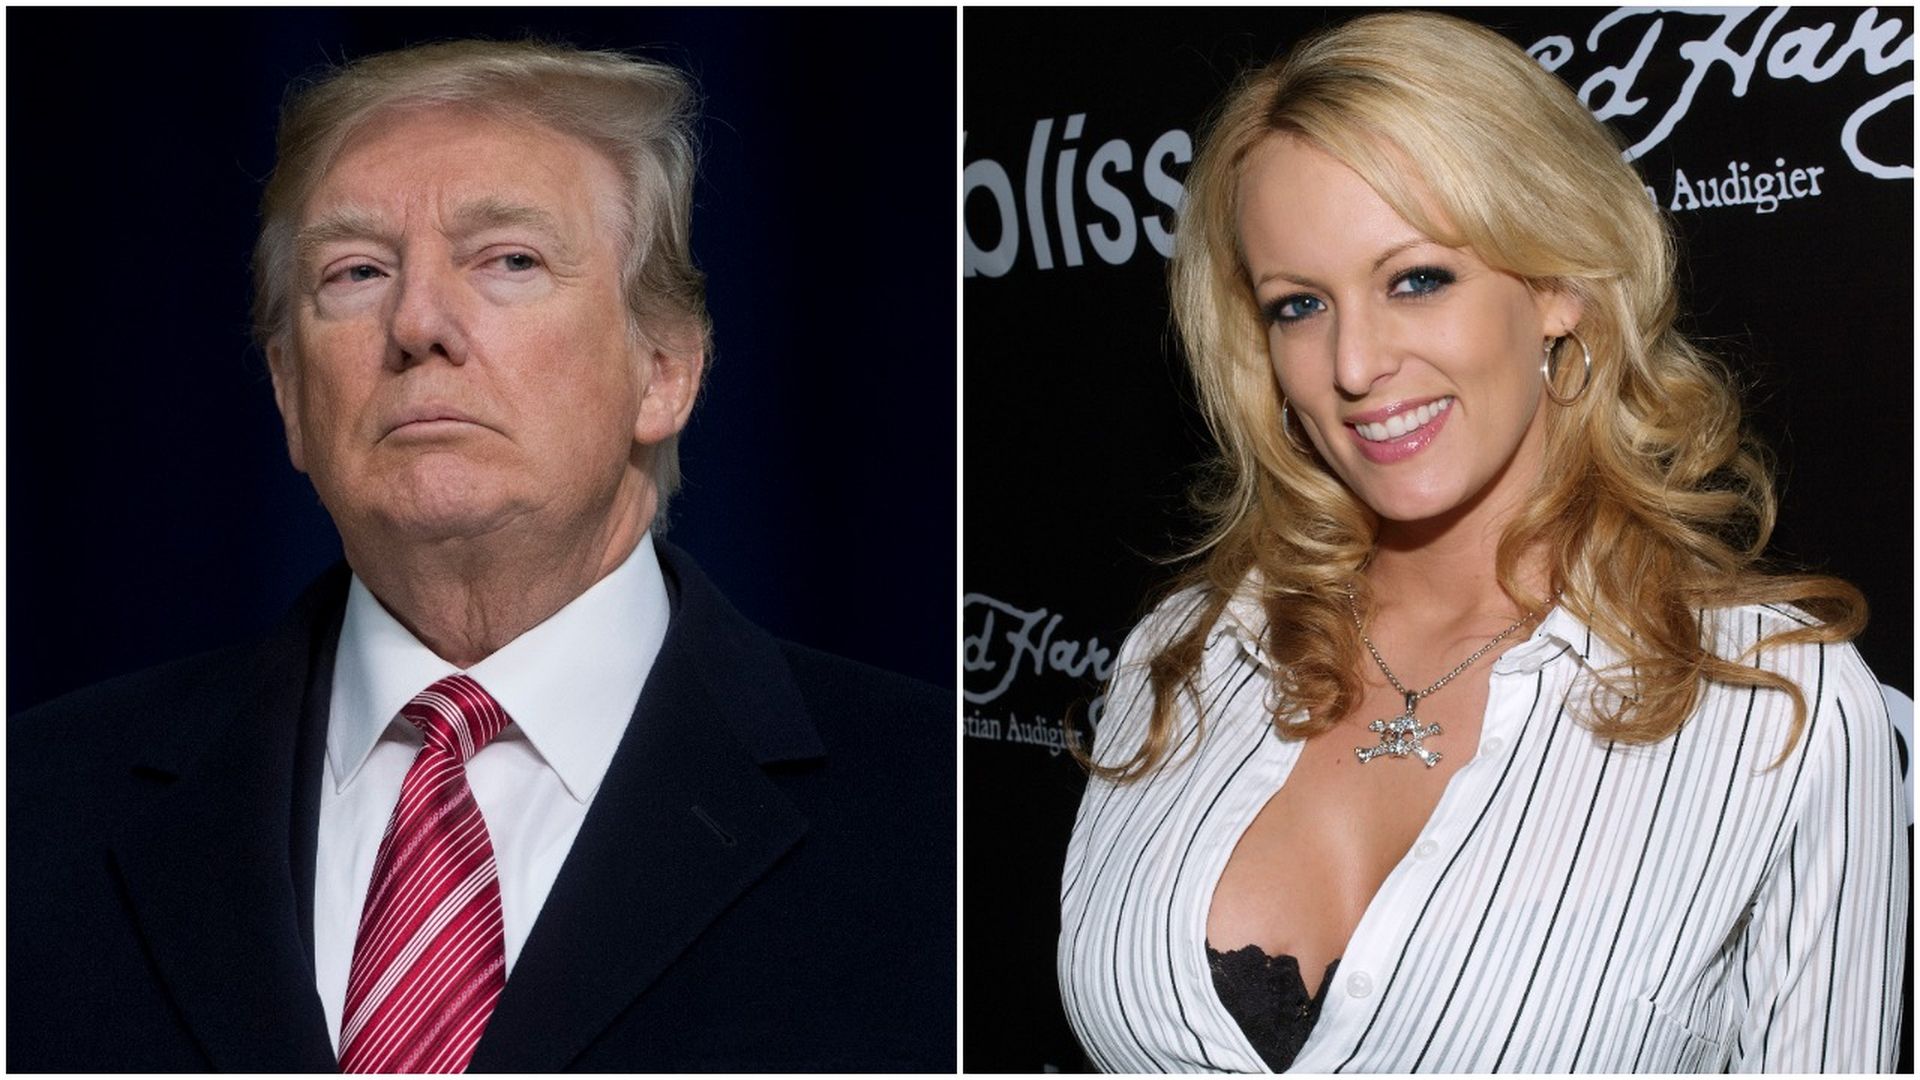 President Trump and Stormy Daniels